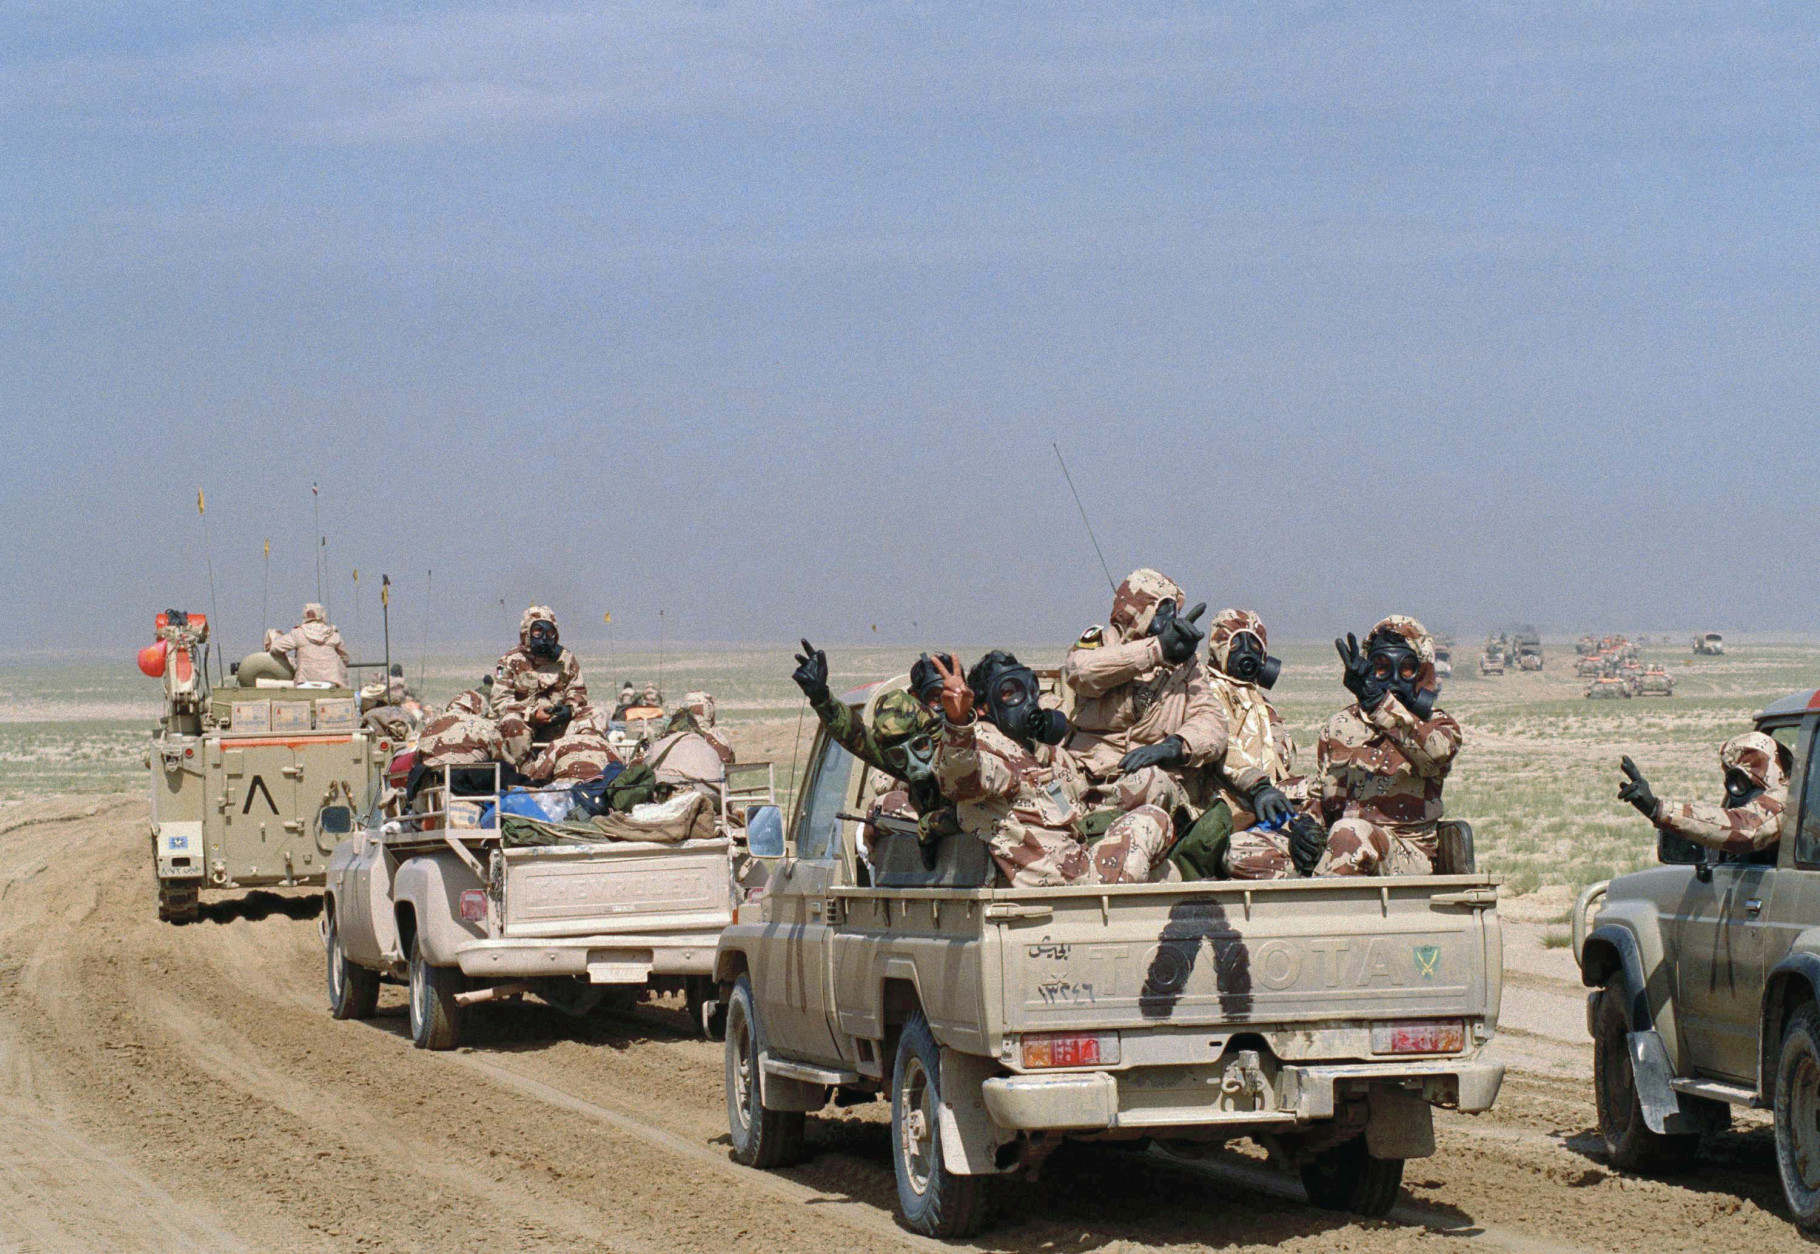 FILE - In this Sunday, Feb. 24, 1991 file photo, Kuwaiti troops wearing gas masks and protective suits as they roll through southern Kuwait in an armed motor convoy, the first full day of ground conflict in Operation Desert Storm. Allied troops encountered resistance in some areas, but no use of gas weapons was reported. Inverted "V" painted on vehicles is the allied recognition symbol. In February 1991, after months of building an international coalition, U.S. forces entered Kuwait to end the Iraqi occupation of its smaller, oil-rich neighbor.  (AP Photo/Laurent Rebours, File)